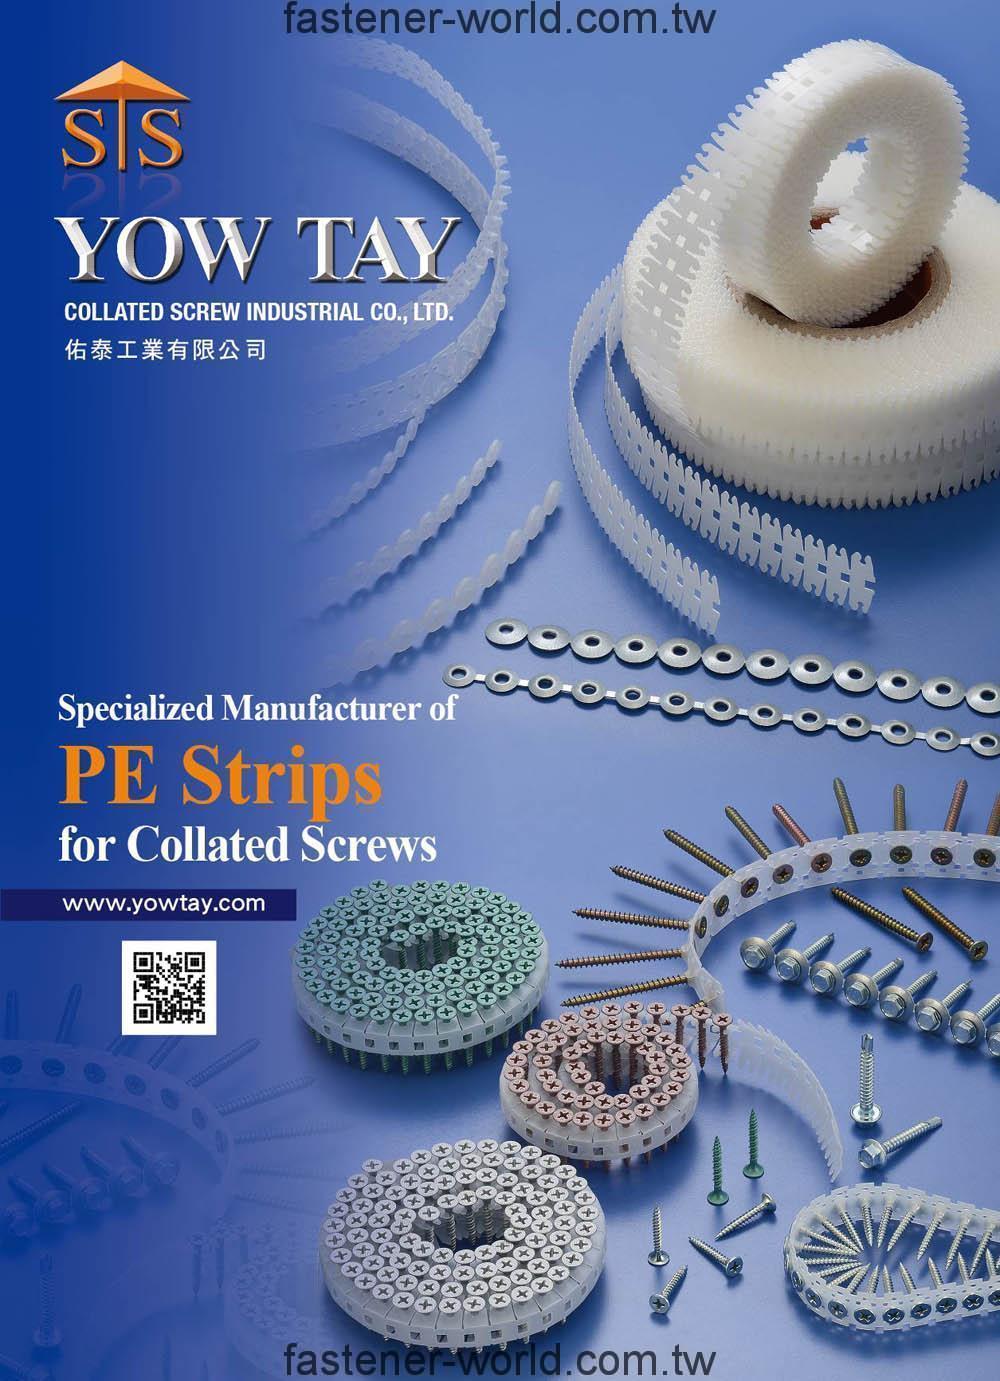 YOW TAY COLLATED SCREW INDUSTRIAL CO., LTD._Online Catalogues